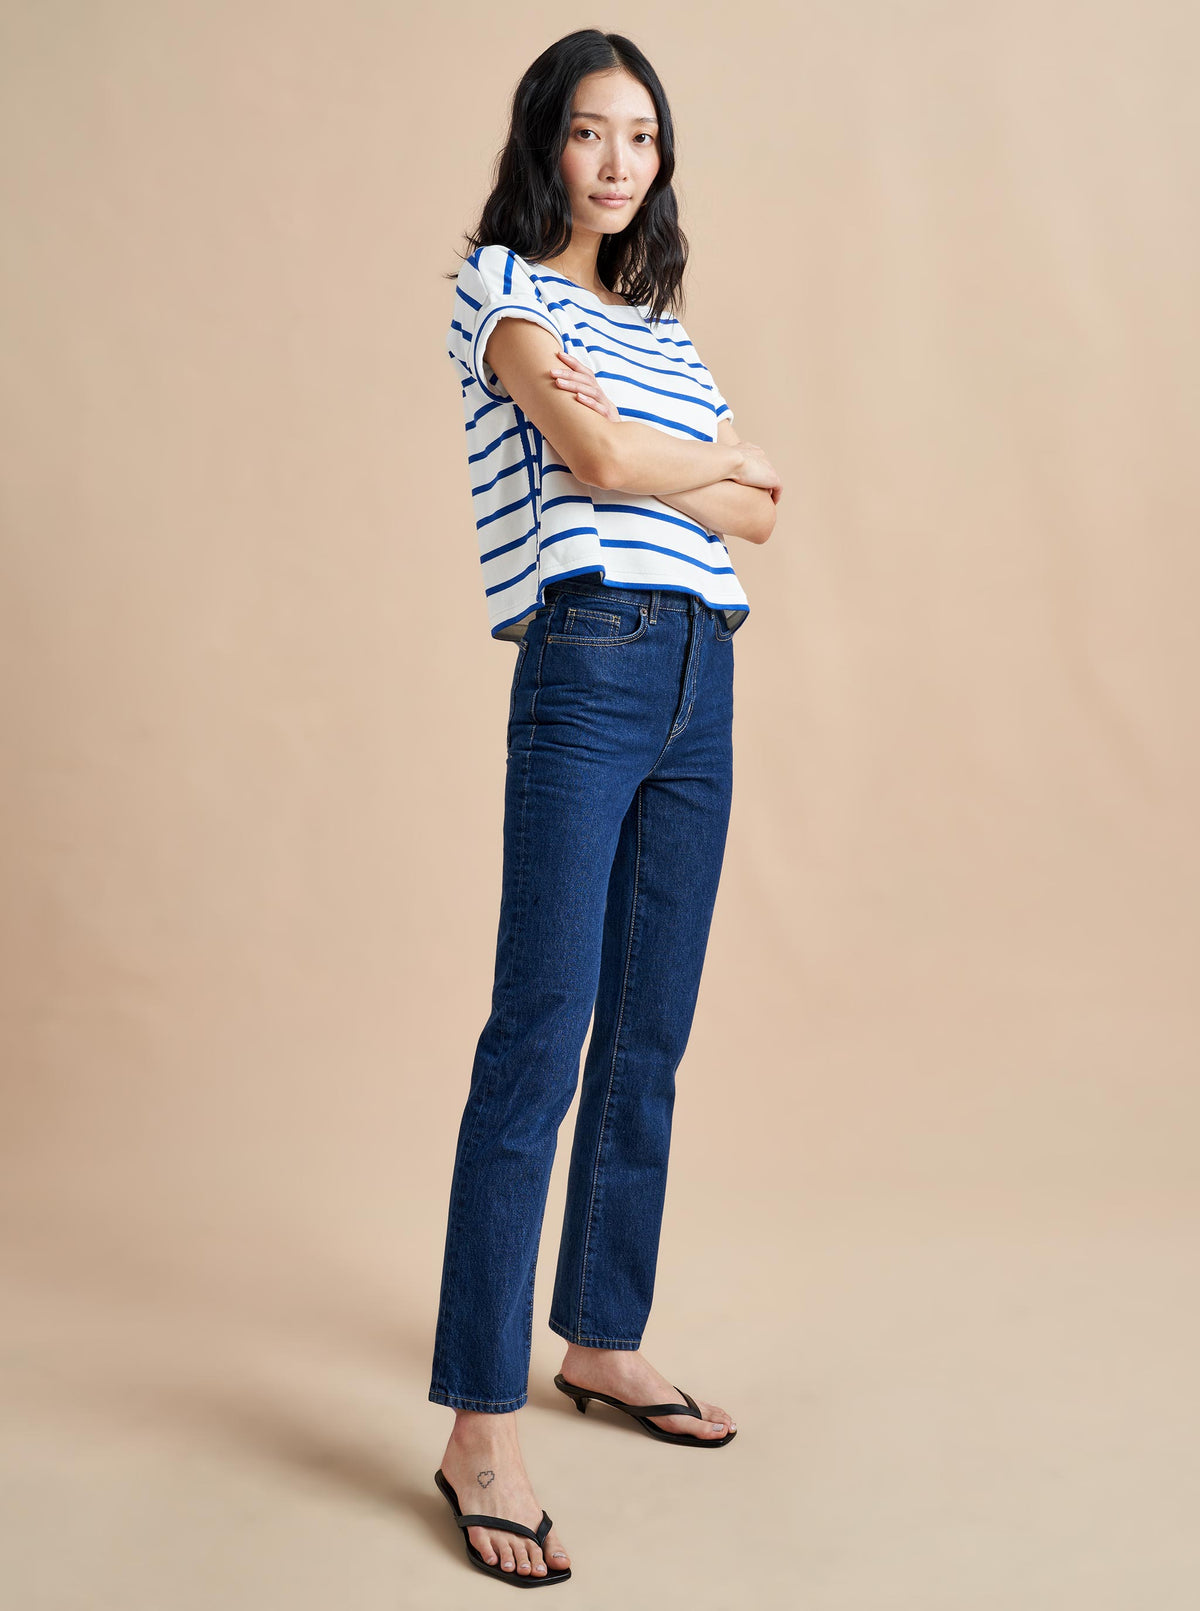 The classic, high-rise, non-stretch, straight-leg jean that gets better after each wear, never goes out of style, never disappoints and you can never get enough of, AKA The Molly jean or The Mom Jean, aptly named after our co-founder that will take you from 9 to 5, after hours and beyond.